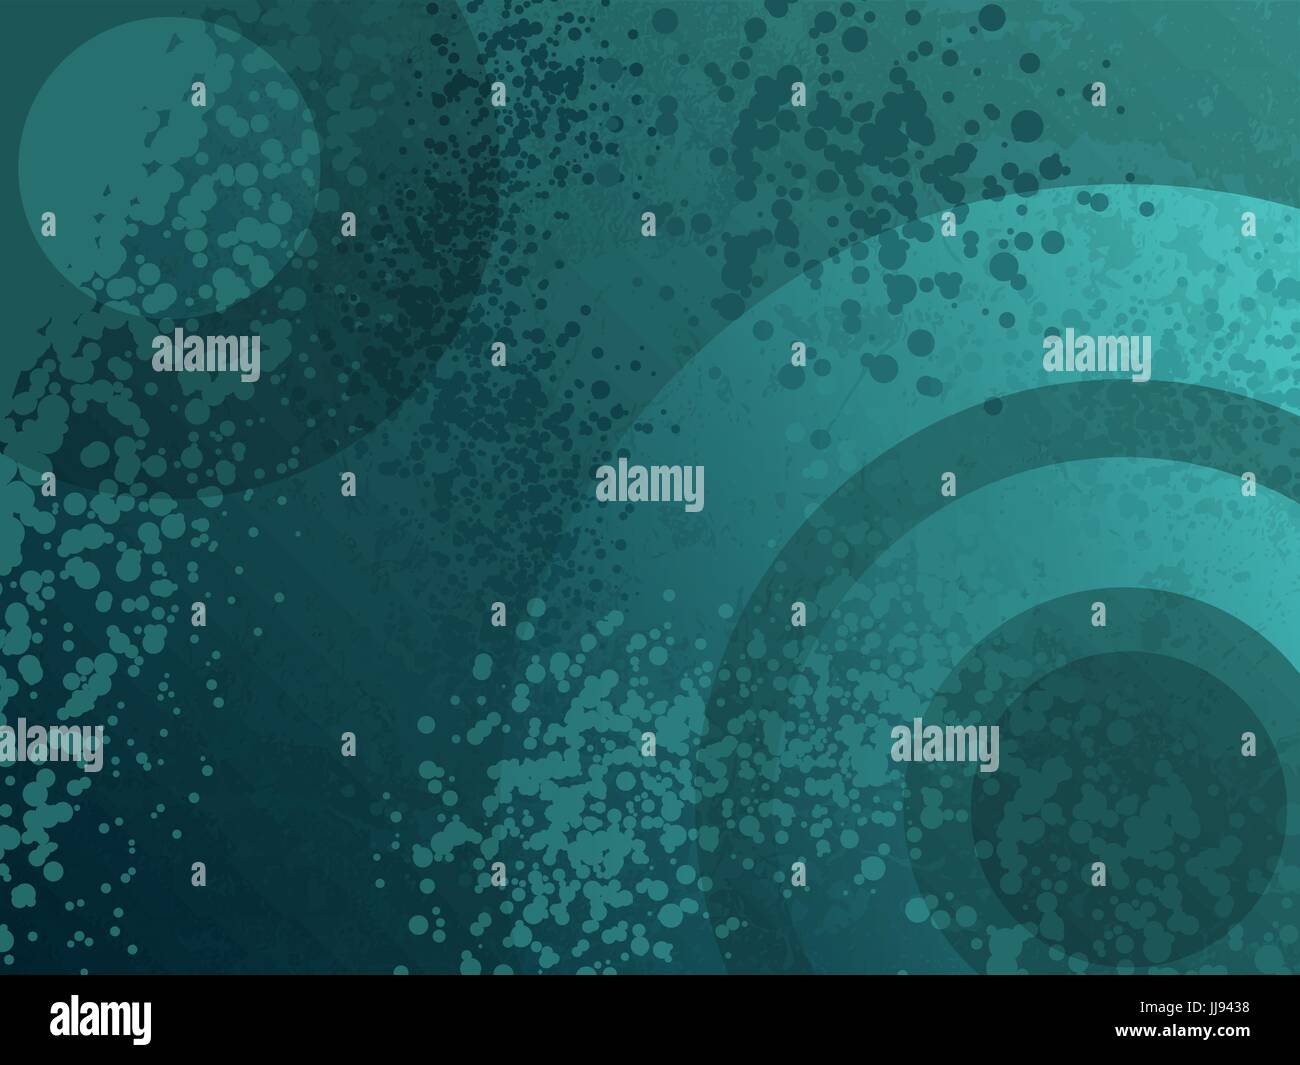 Grunge cartoon spotted halftones turquoise modern background. Distress damaged circles overlay dirty dots paint spray texture effect. Stock Vector